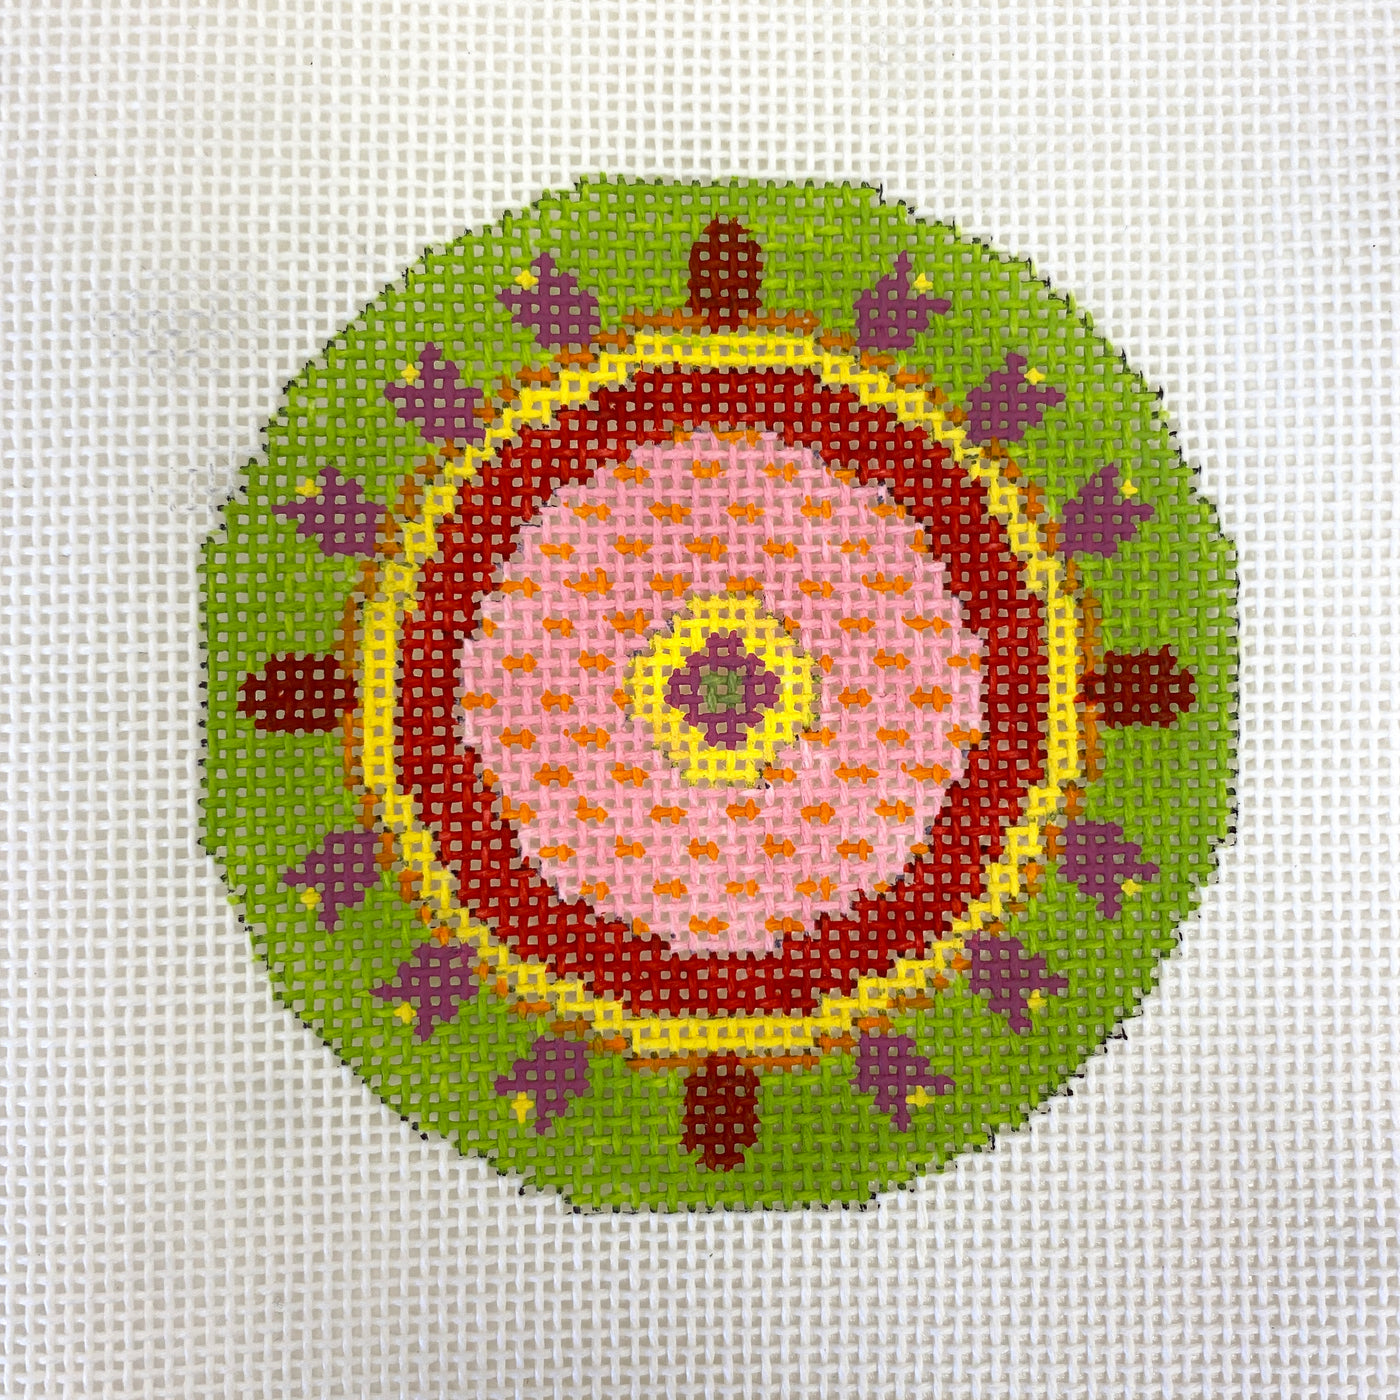 Red and Green Whirlygig Needlepoint Canvas